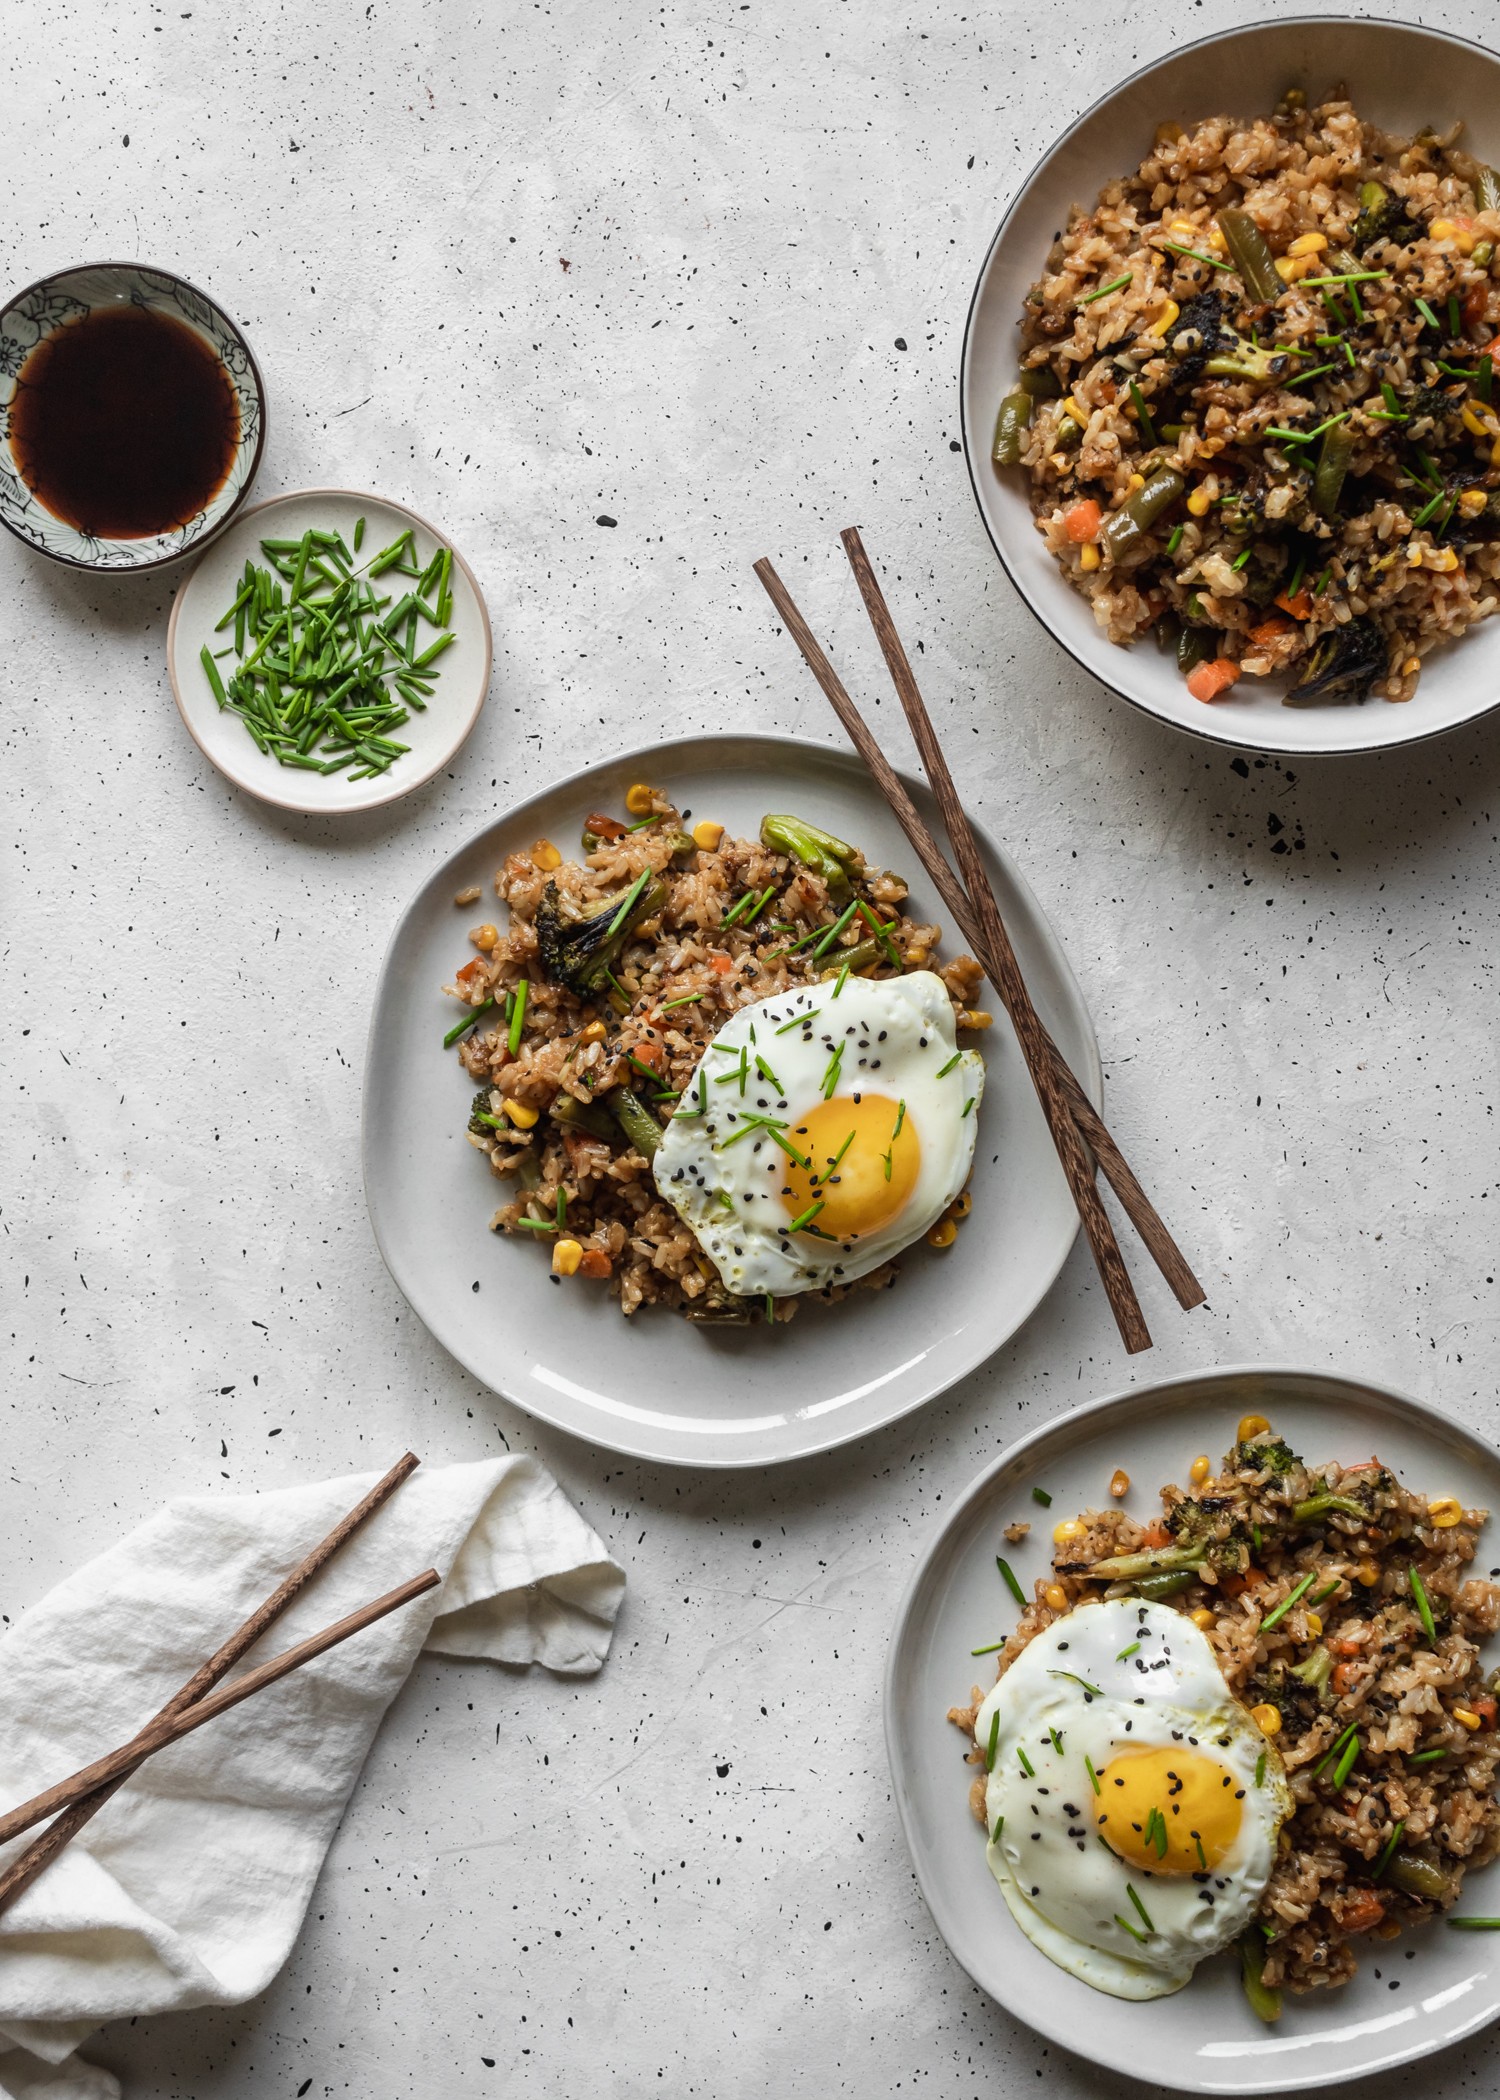 A bird's eye shot of three plates of fried rice next to a white linen, wooden chopsticks, a bowl of soy sauce, and a plate of chives on a grey counter.